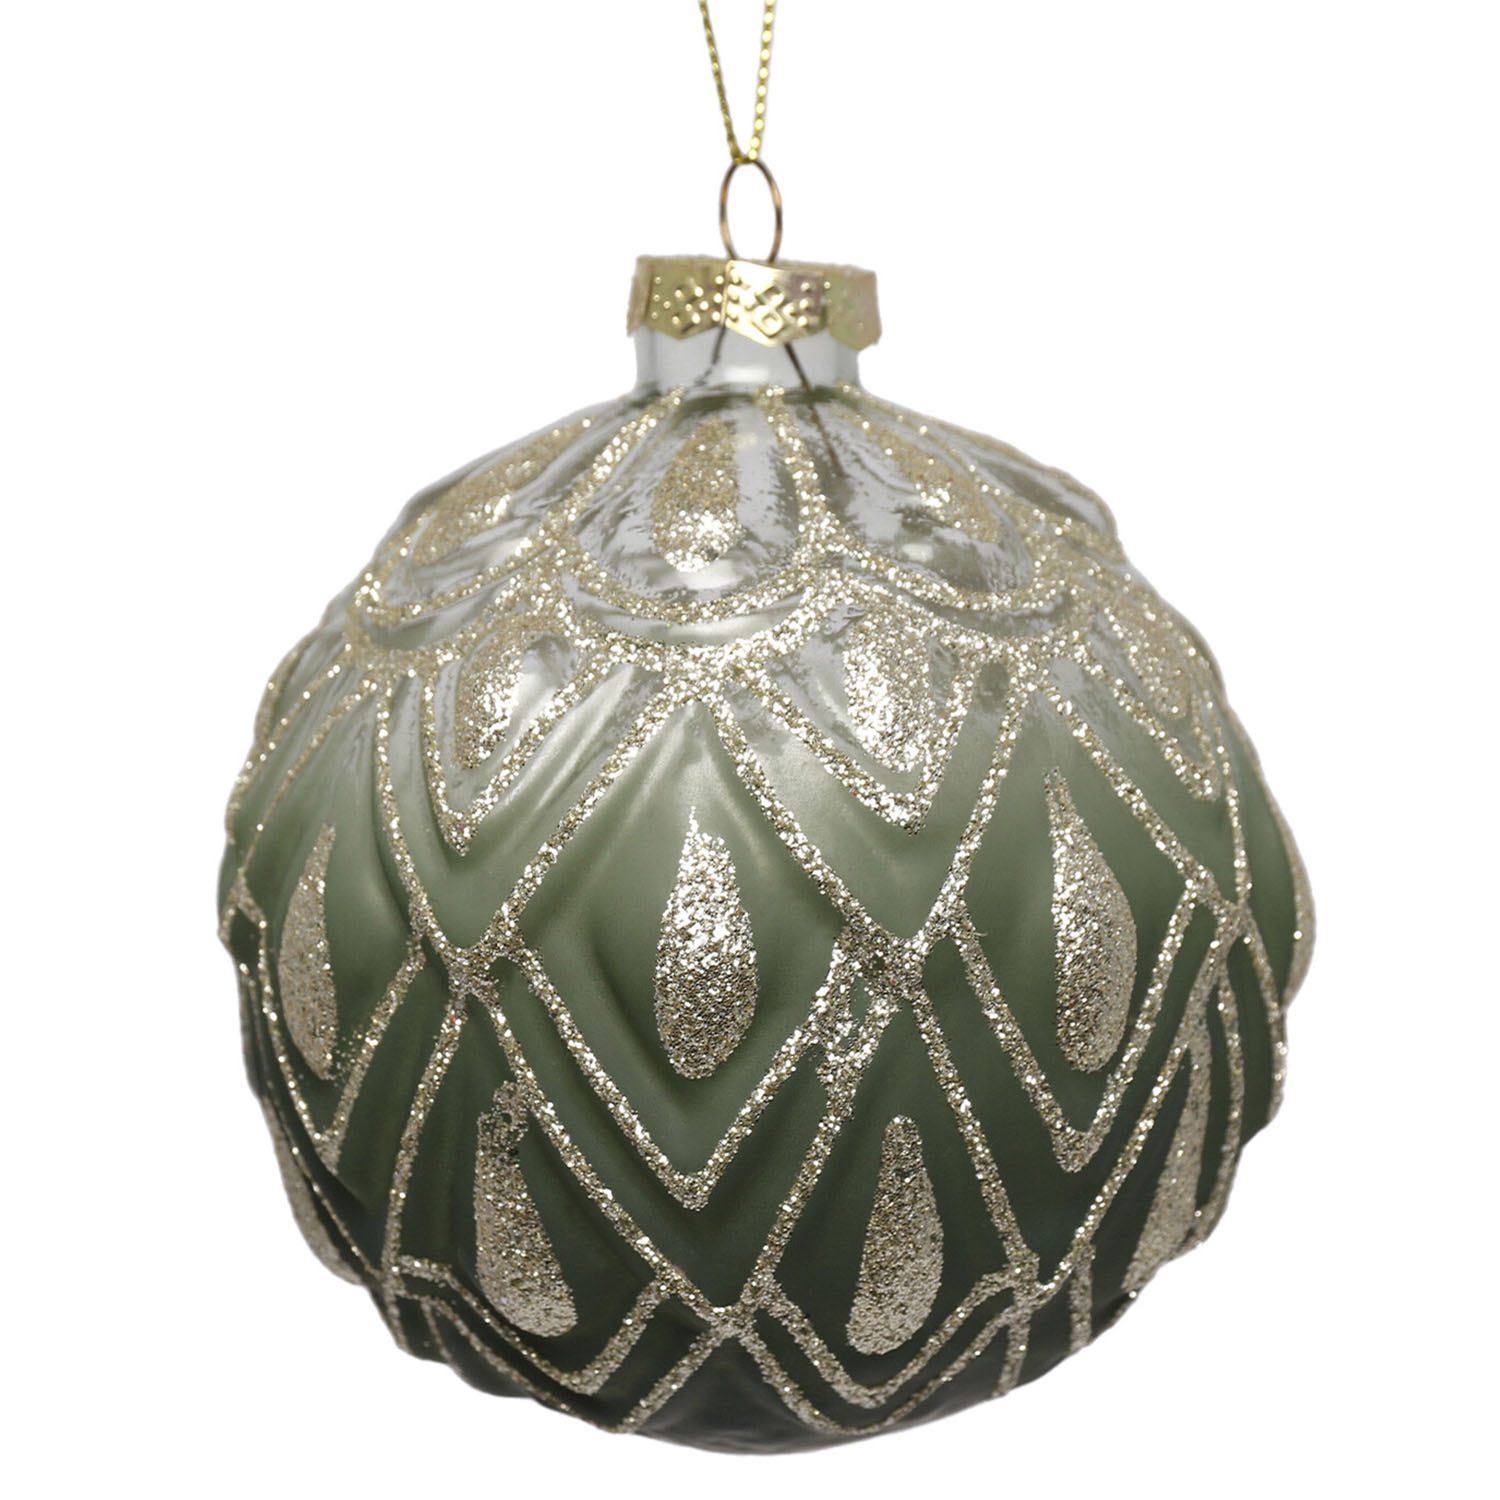 Royal Emerald Ombre Green Glitter Bauble Image